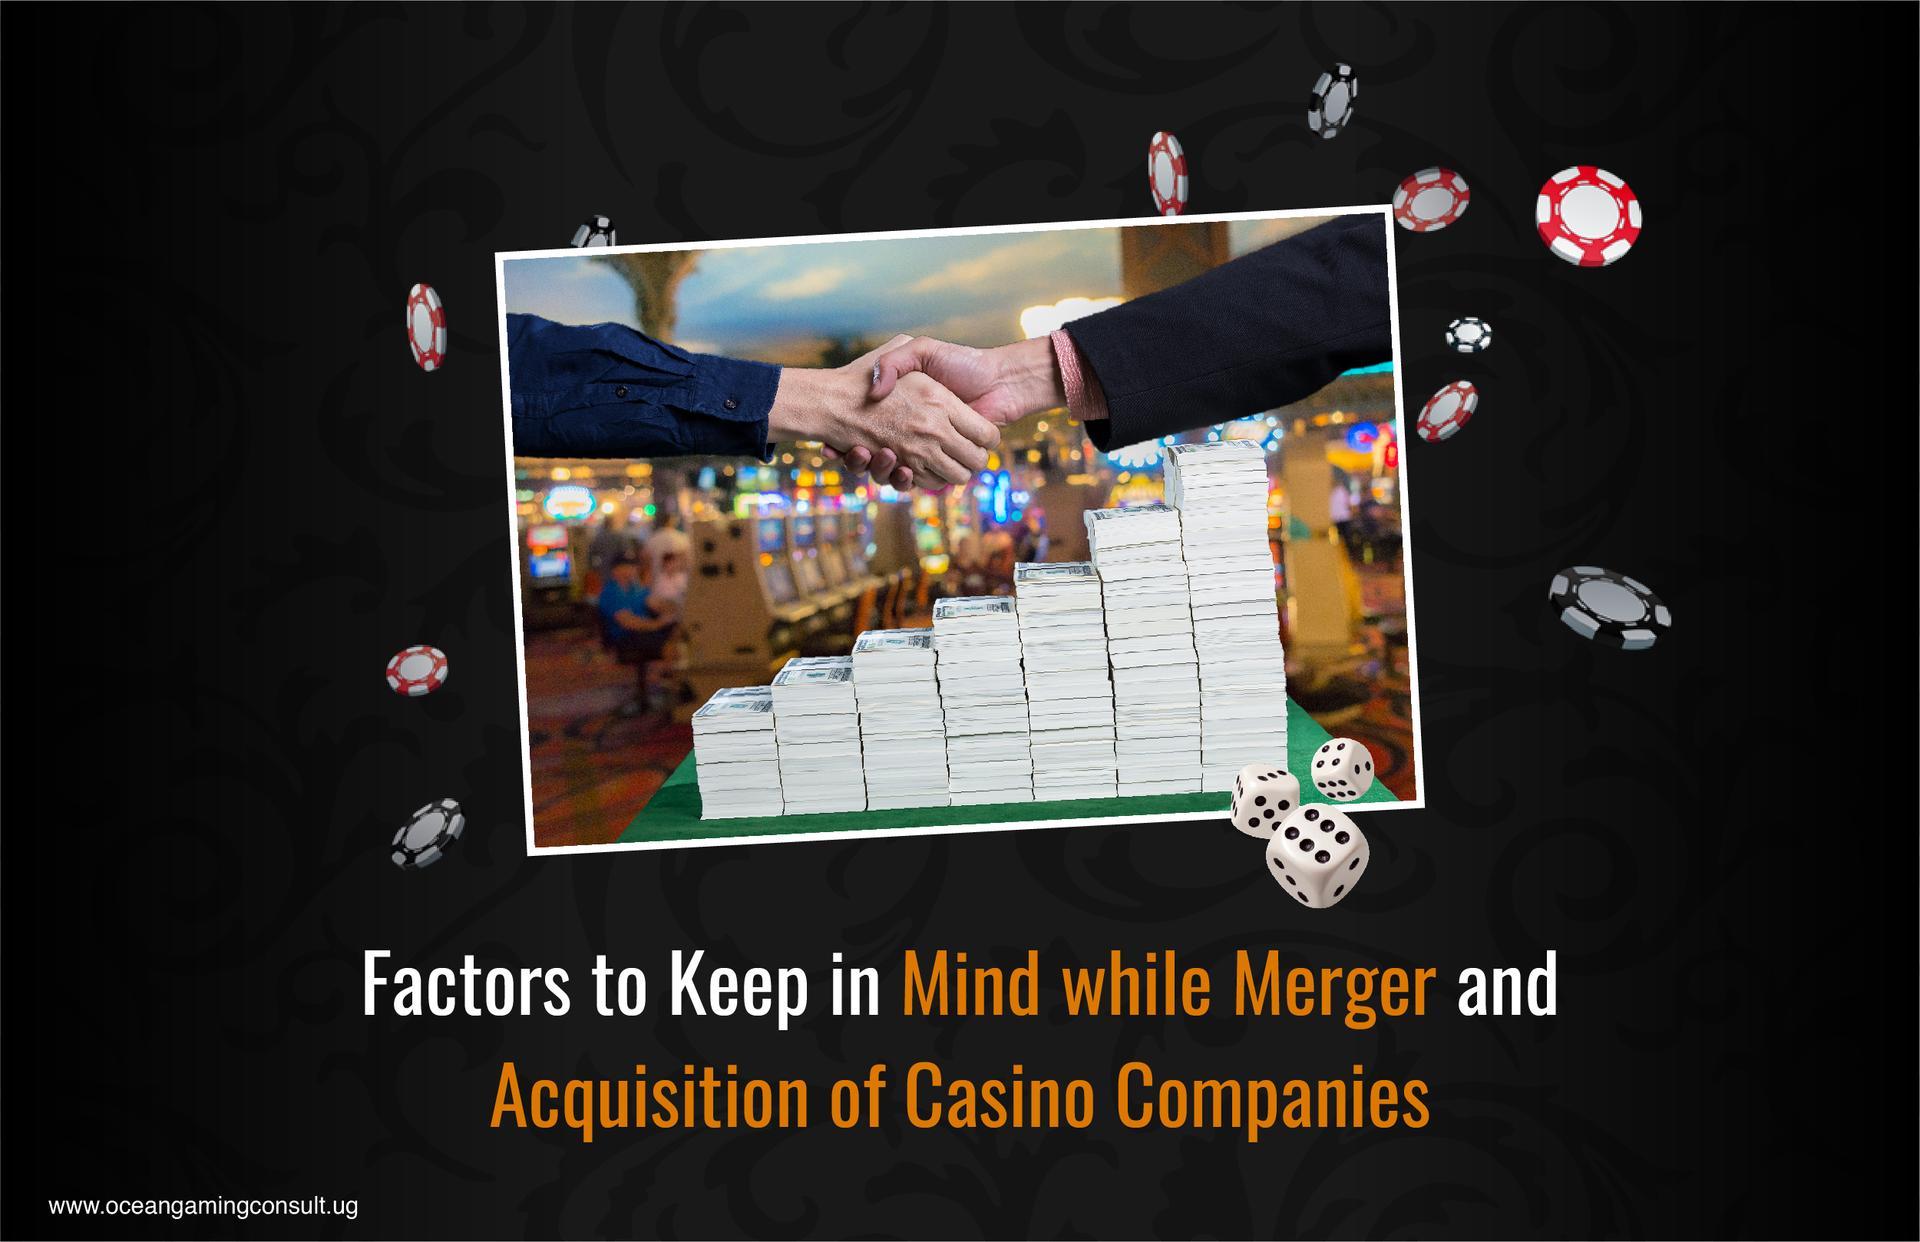 Factors to Keep in Mind while Merger and Acquisition of Casino Companies